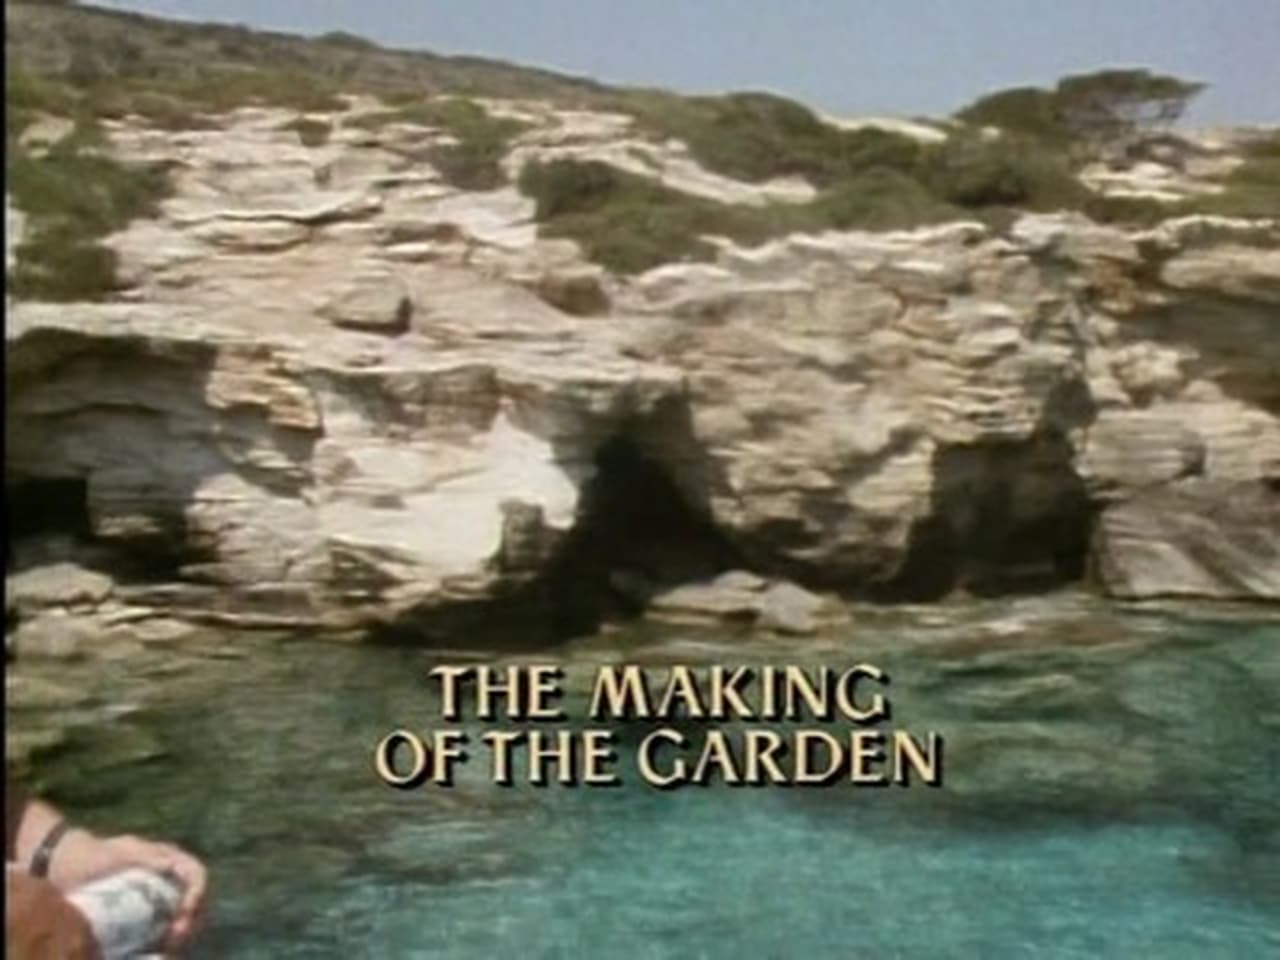 The Making of the Garden